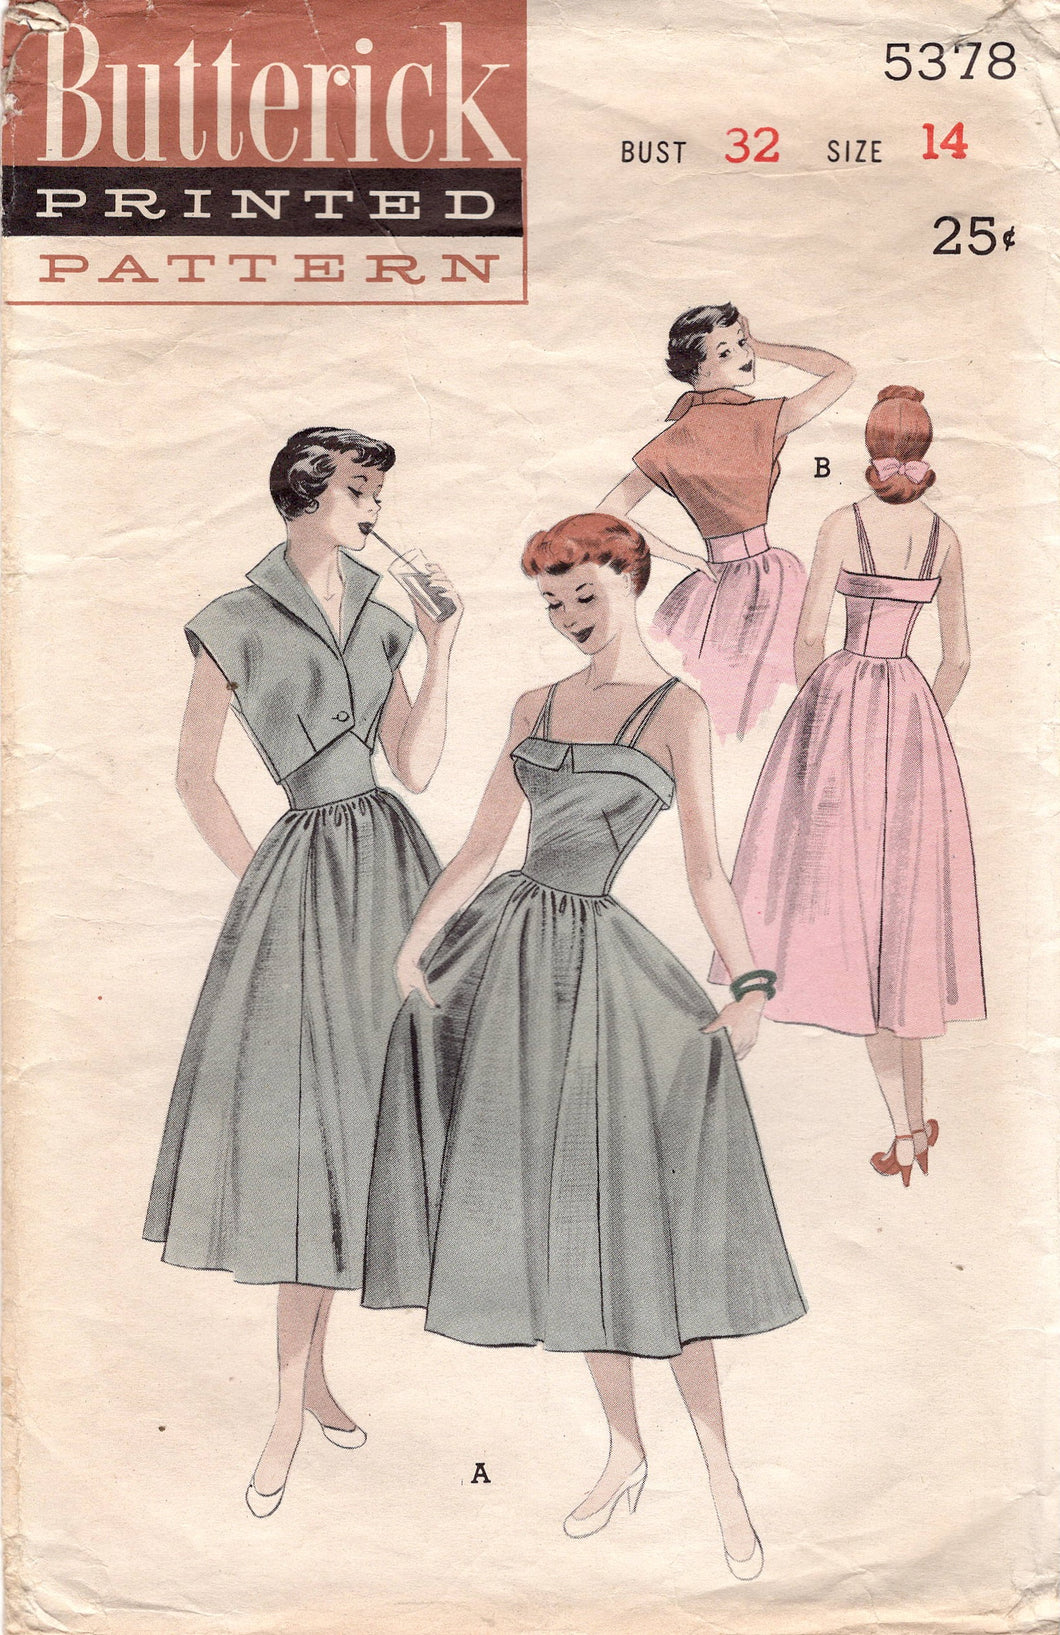 1950’s Butterick One Piece Sundress with Thin Straps and Bolero Pattern with tall collar - Bust 32” - No. 5378